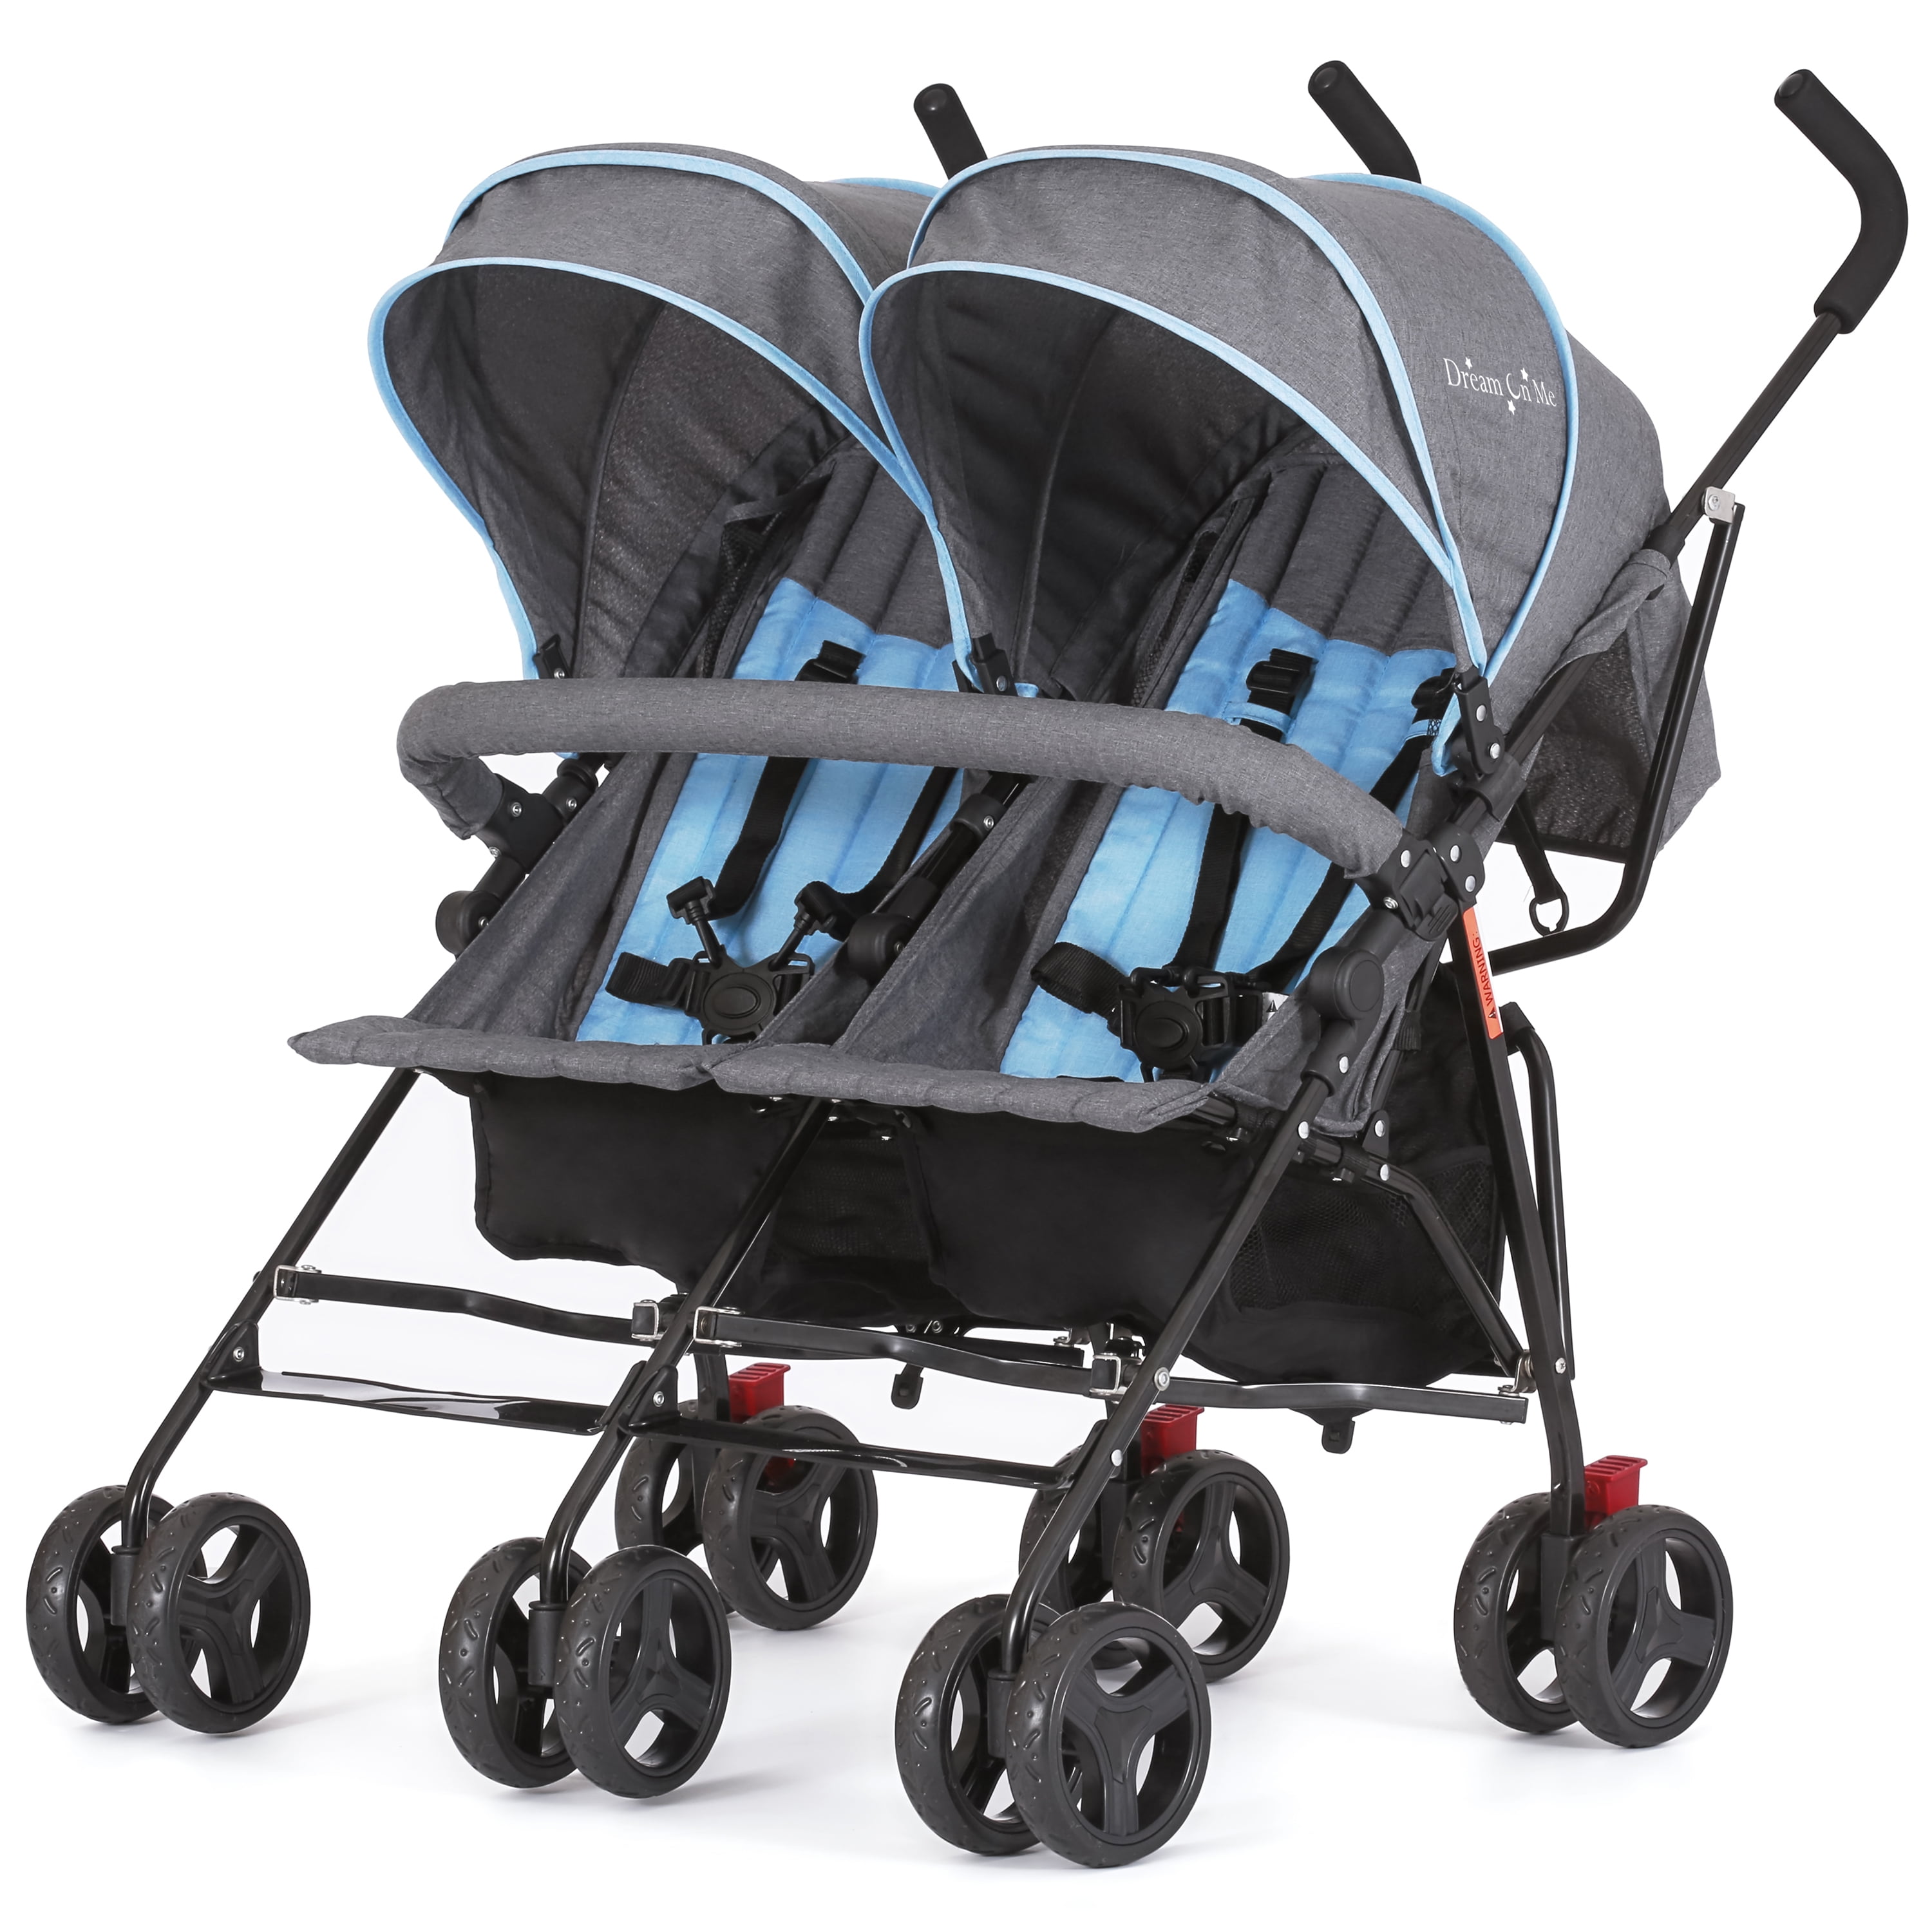 Side-by-side Double Strollers For Navigating Tight Spaces